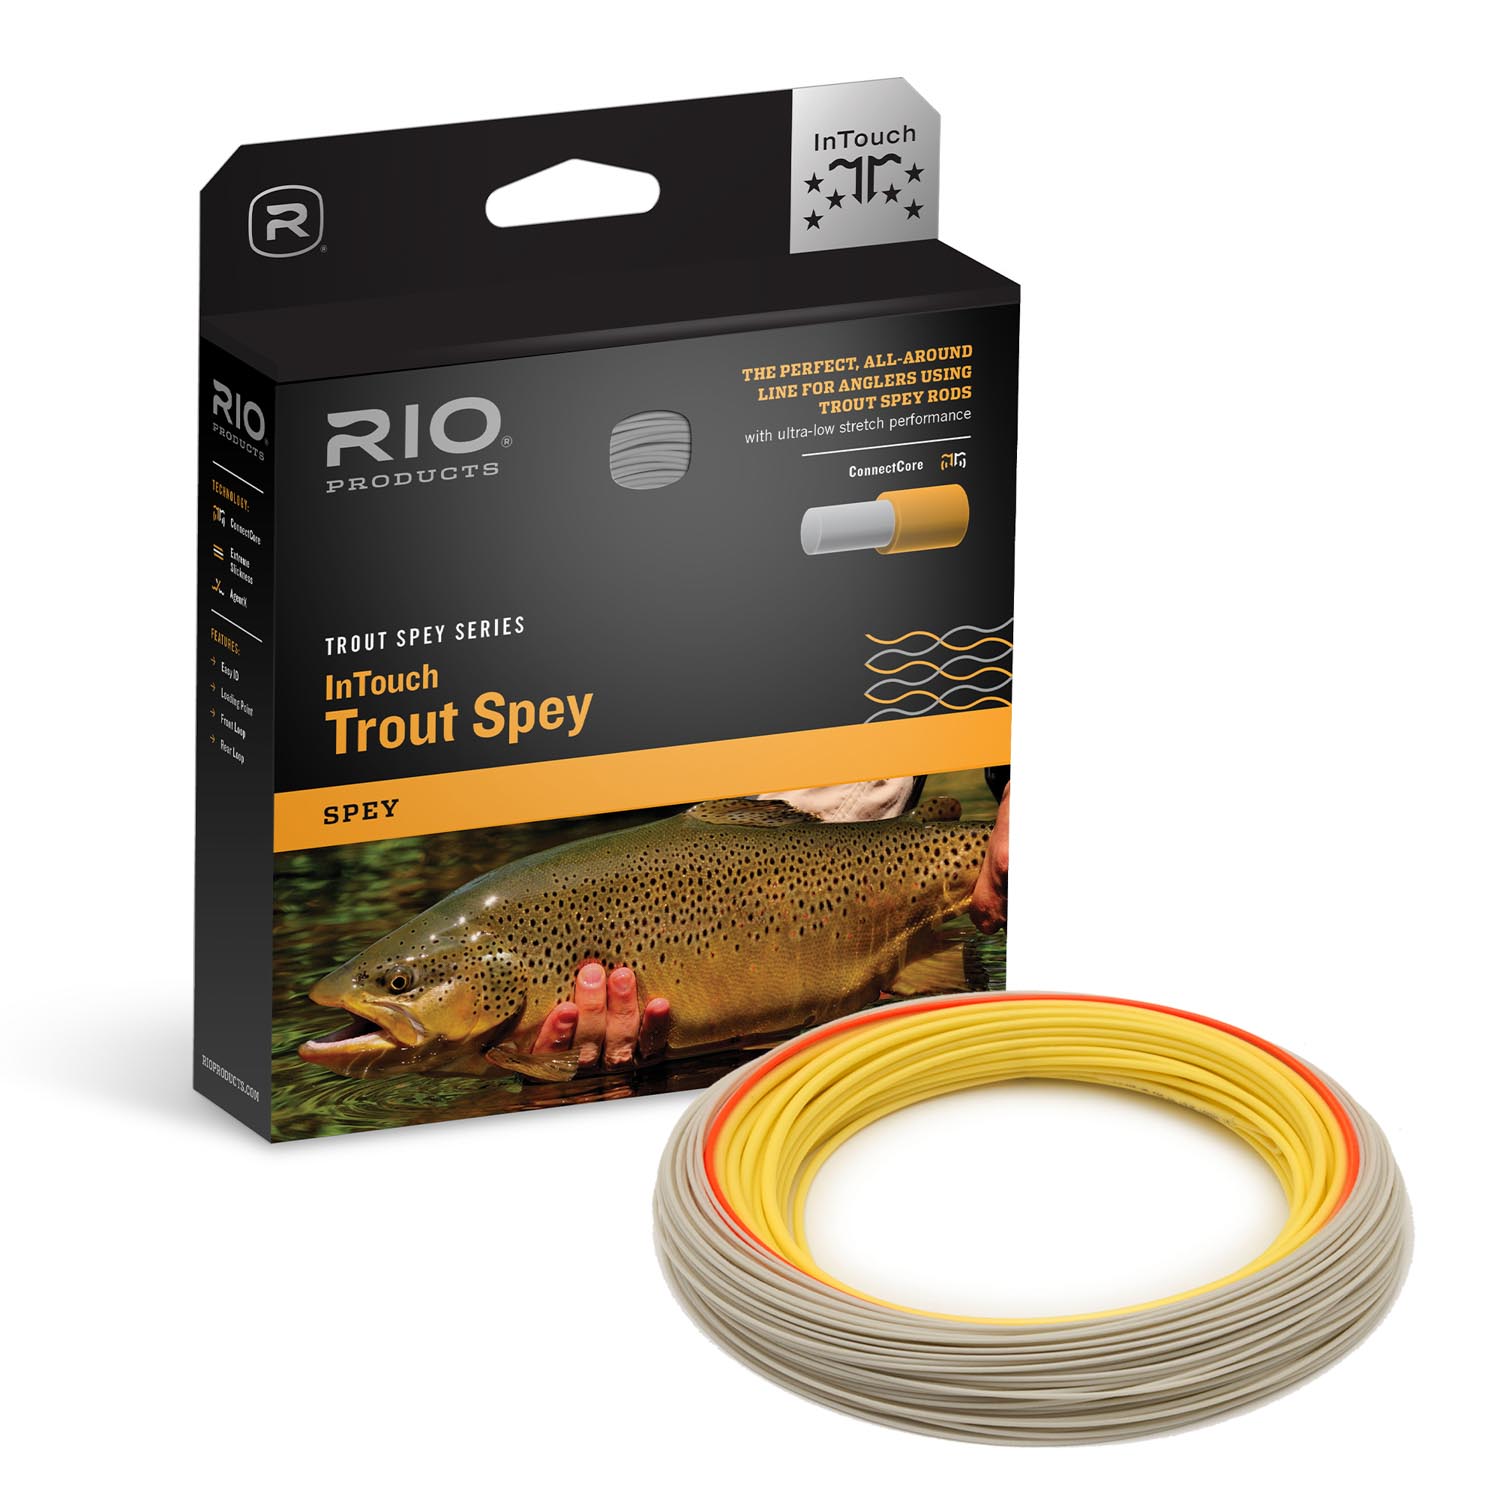 RIO Intouch Trout Spey Line – Guide Flyfishing, Fly Fishing Rods, Reels, Sage, Redington, RIO